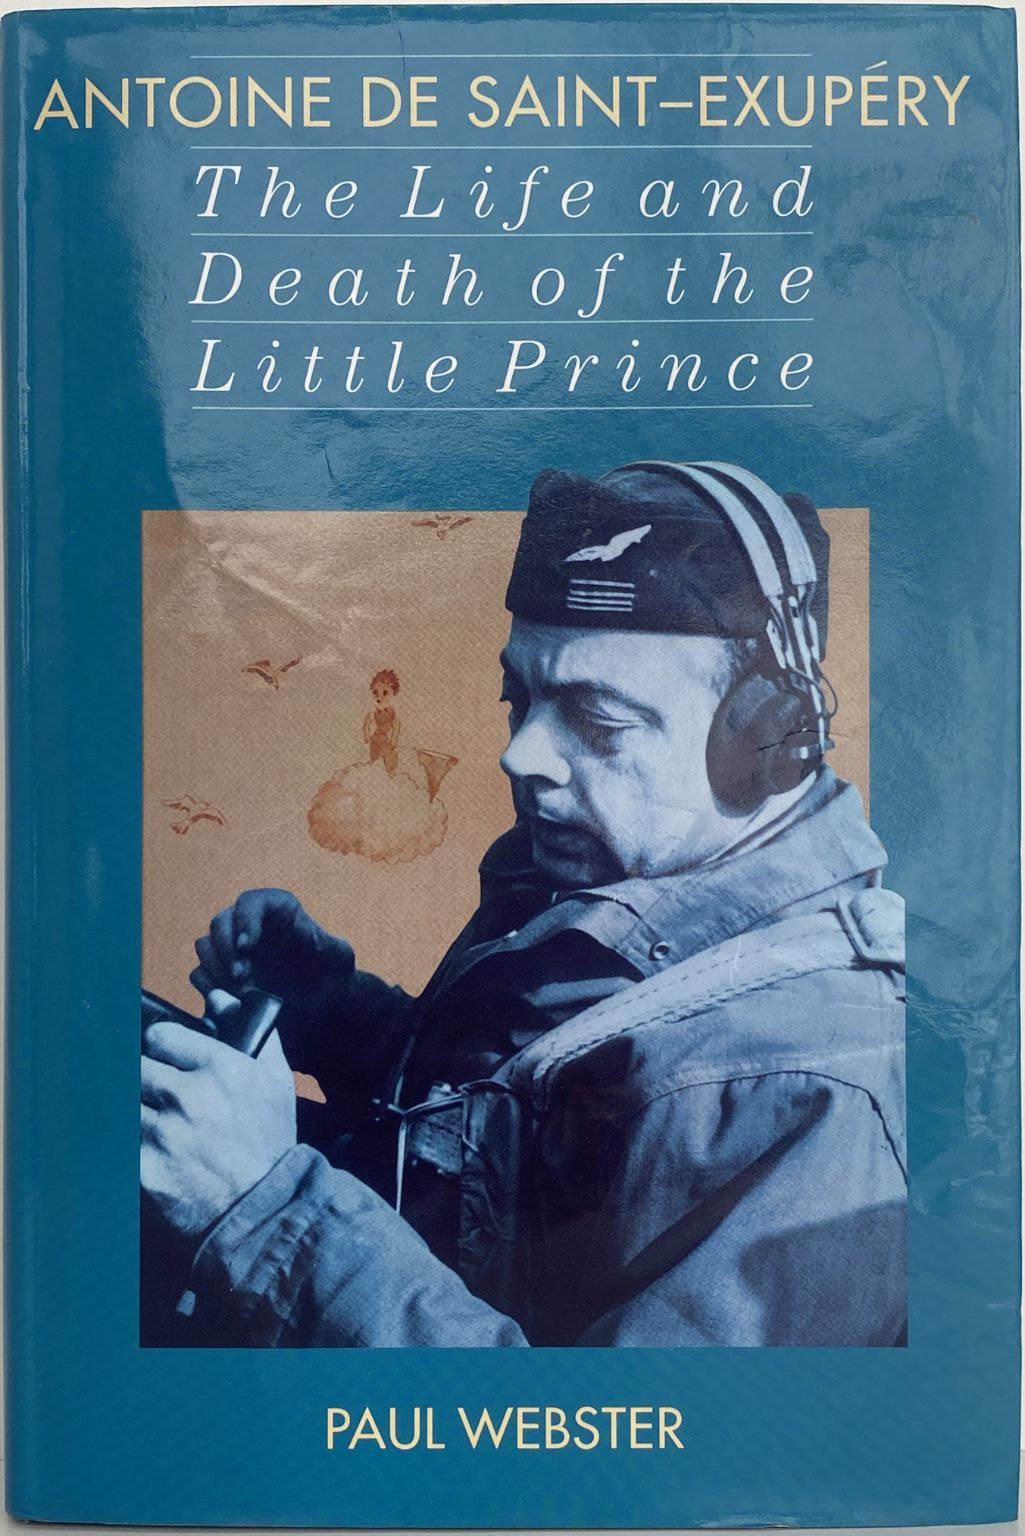 ANTOINE DE SAINT-EXUPERY: The Life and Death of the Little Prince